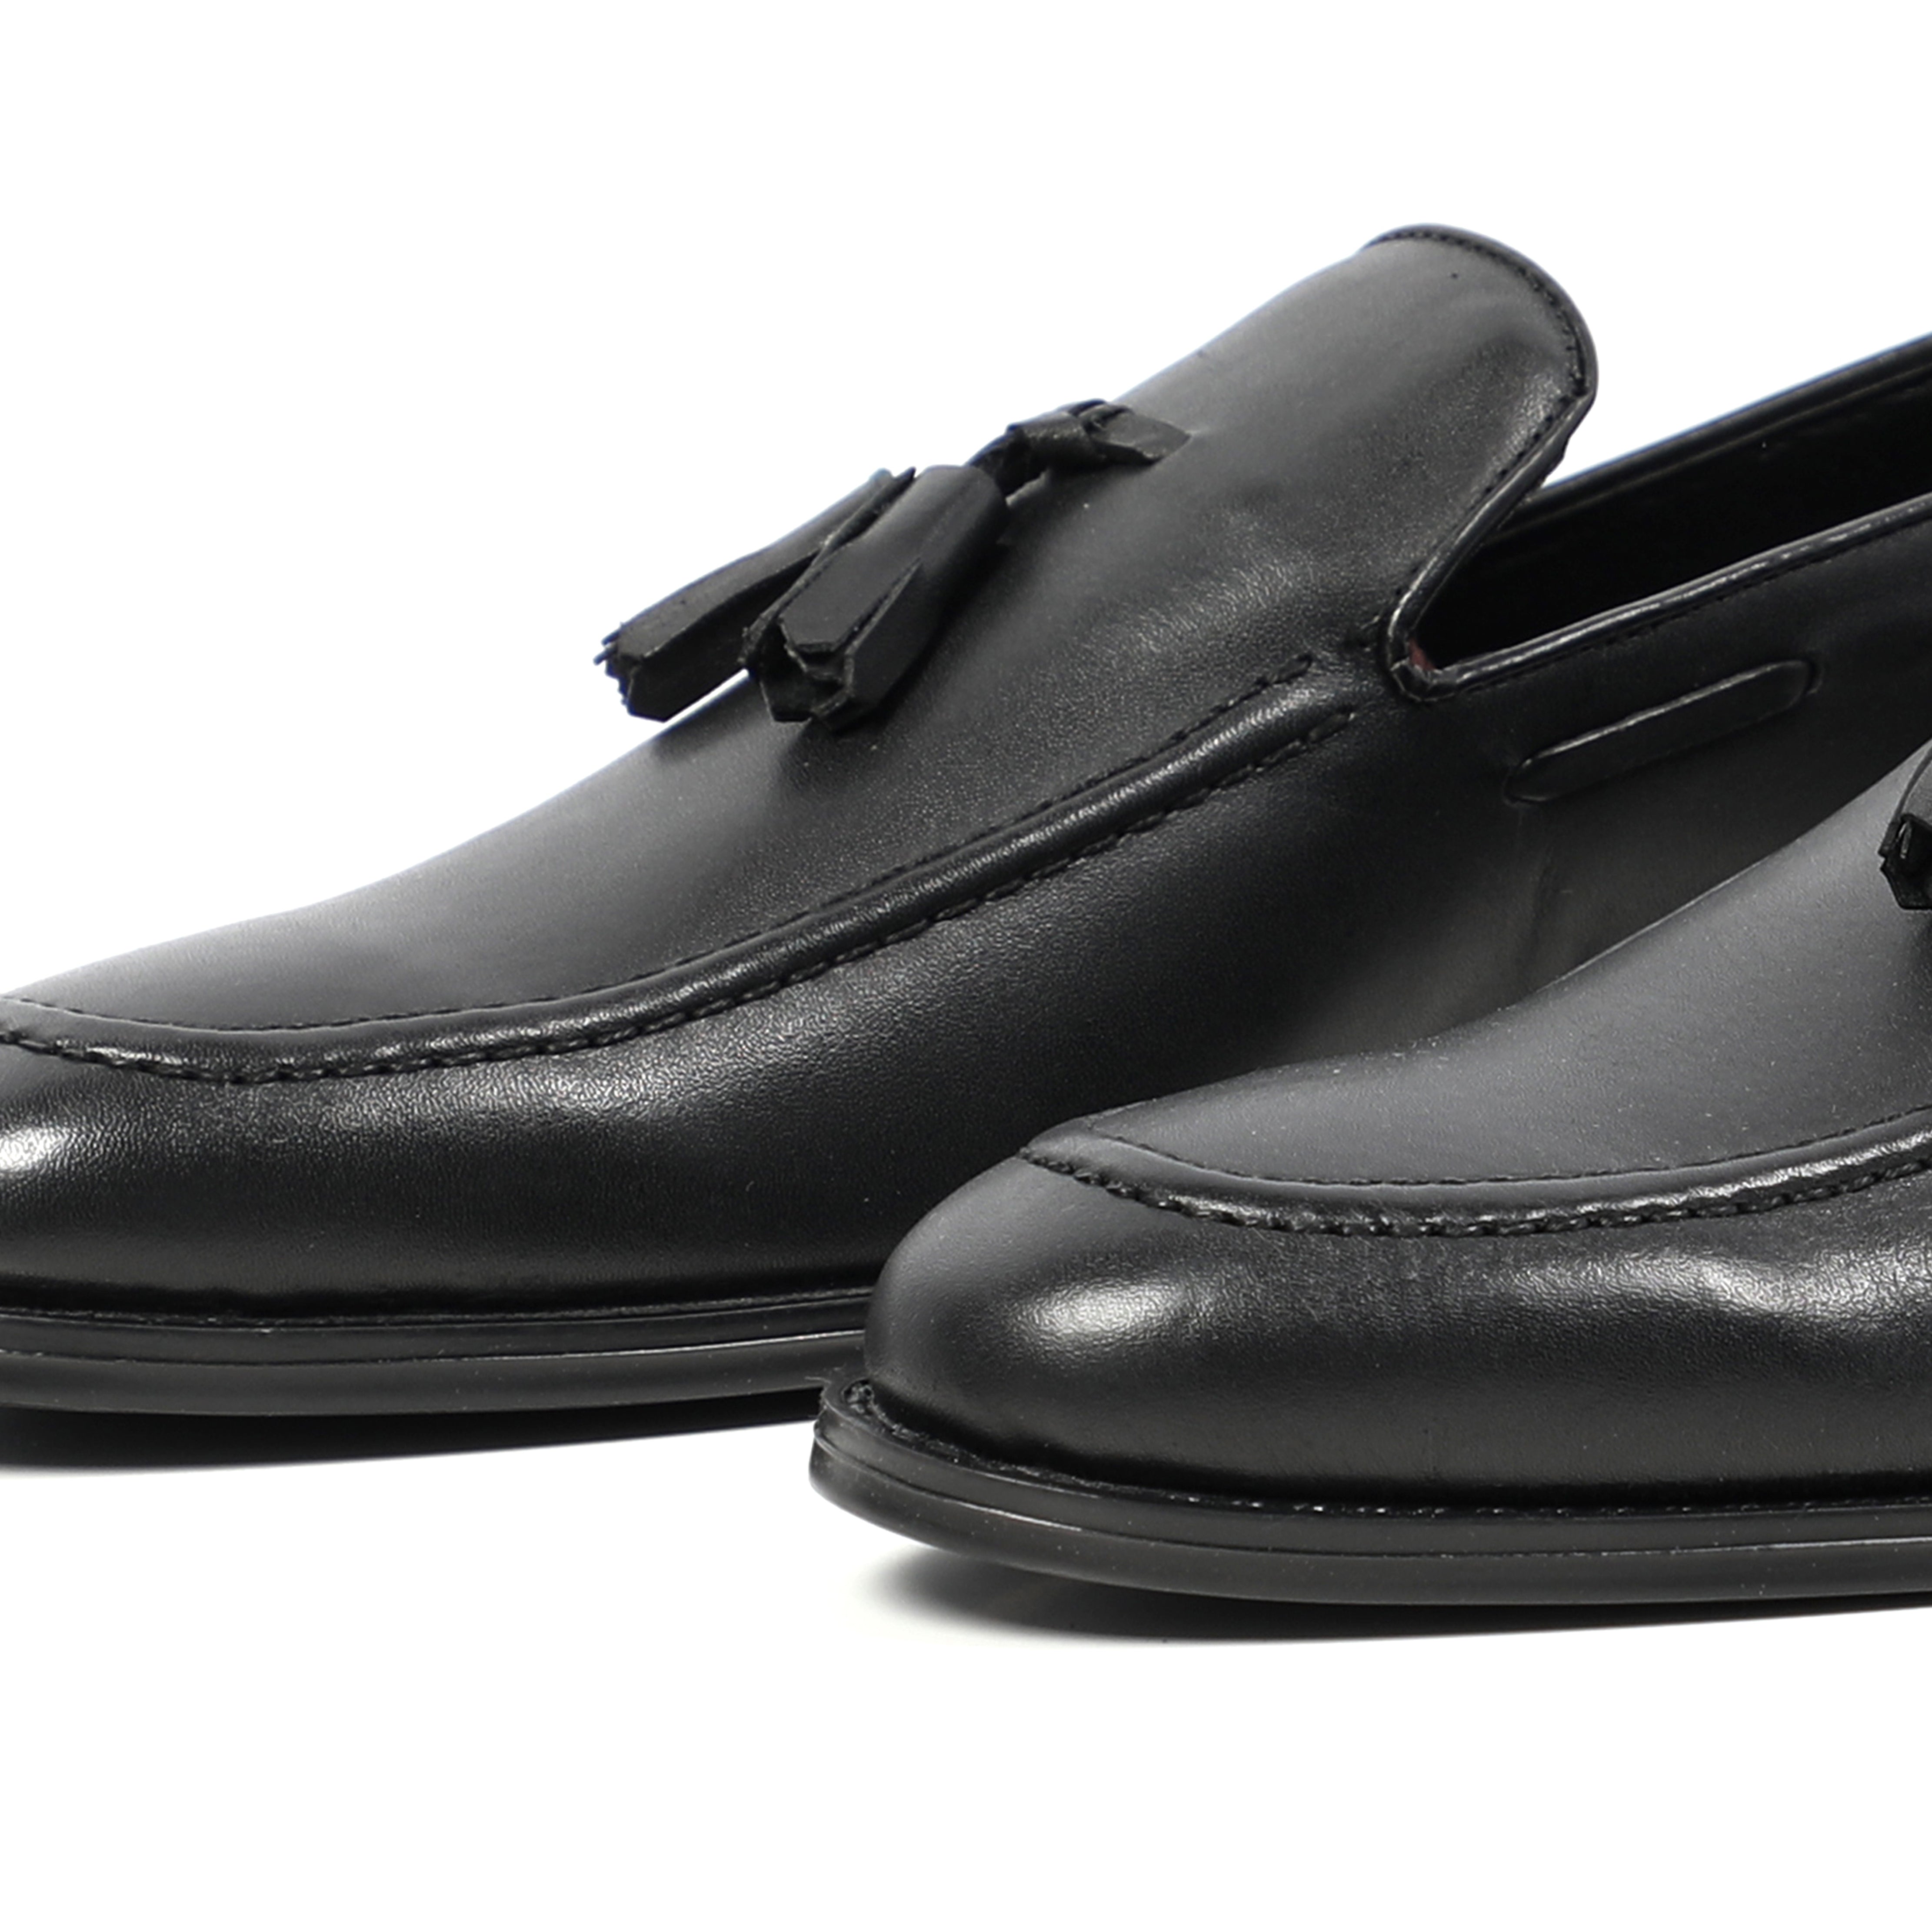 Classic Glossy Moccasin Shoes With Design On Top